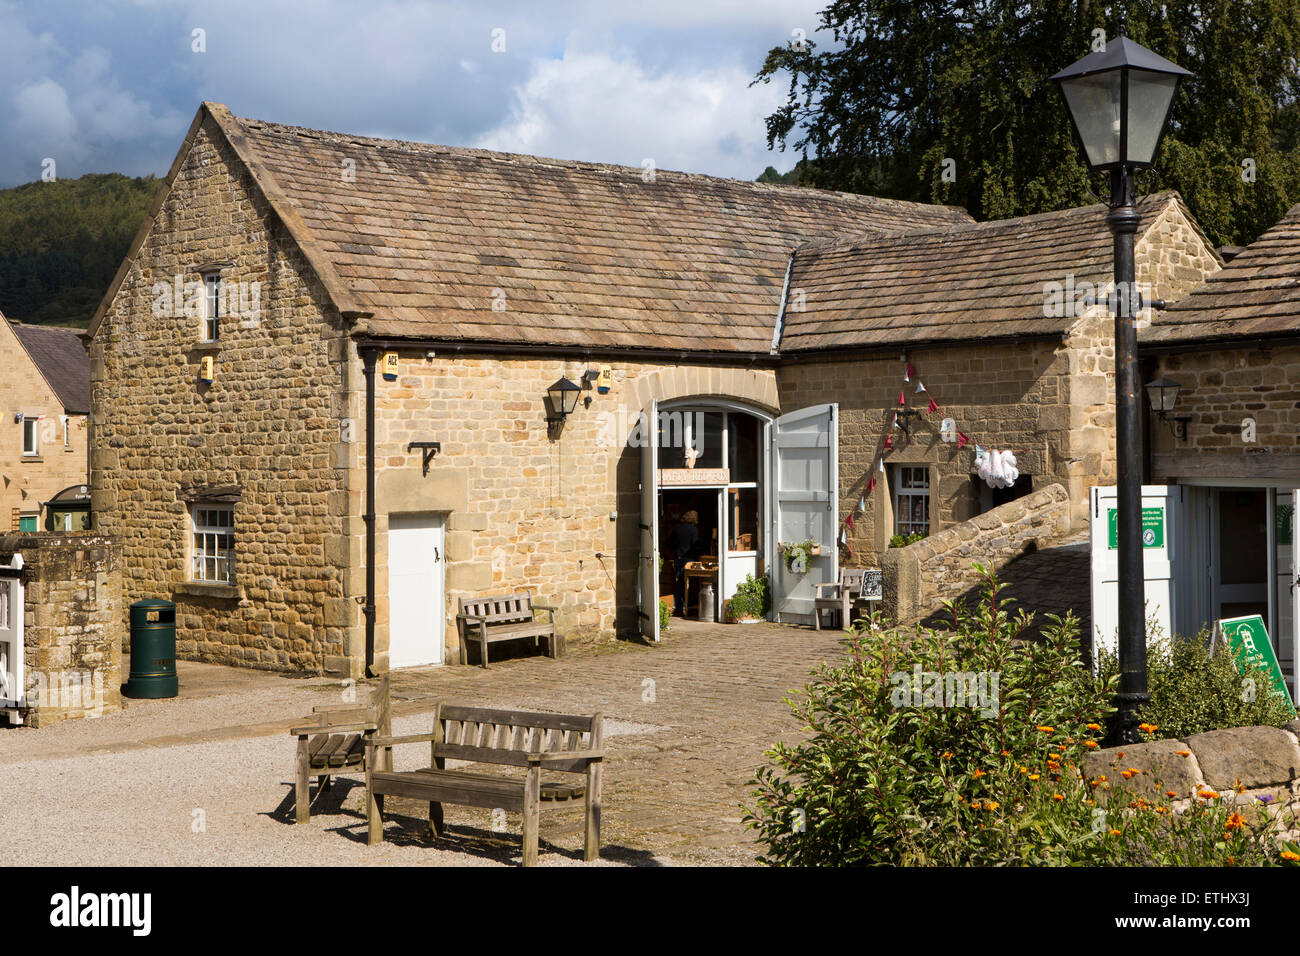 UK, England, Derbyshire, Eyam, Hall courtyard, old stone barns used as craft workshops, shops and offices Stock Photo